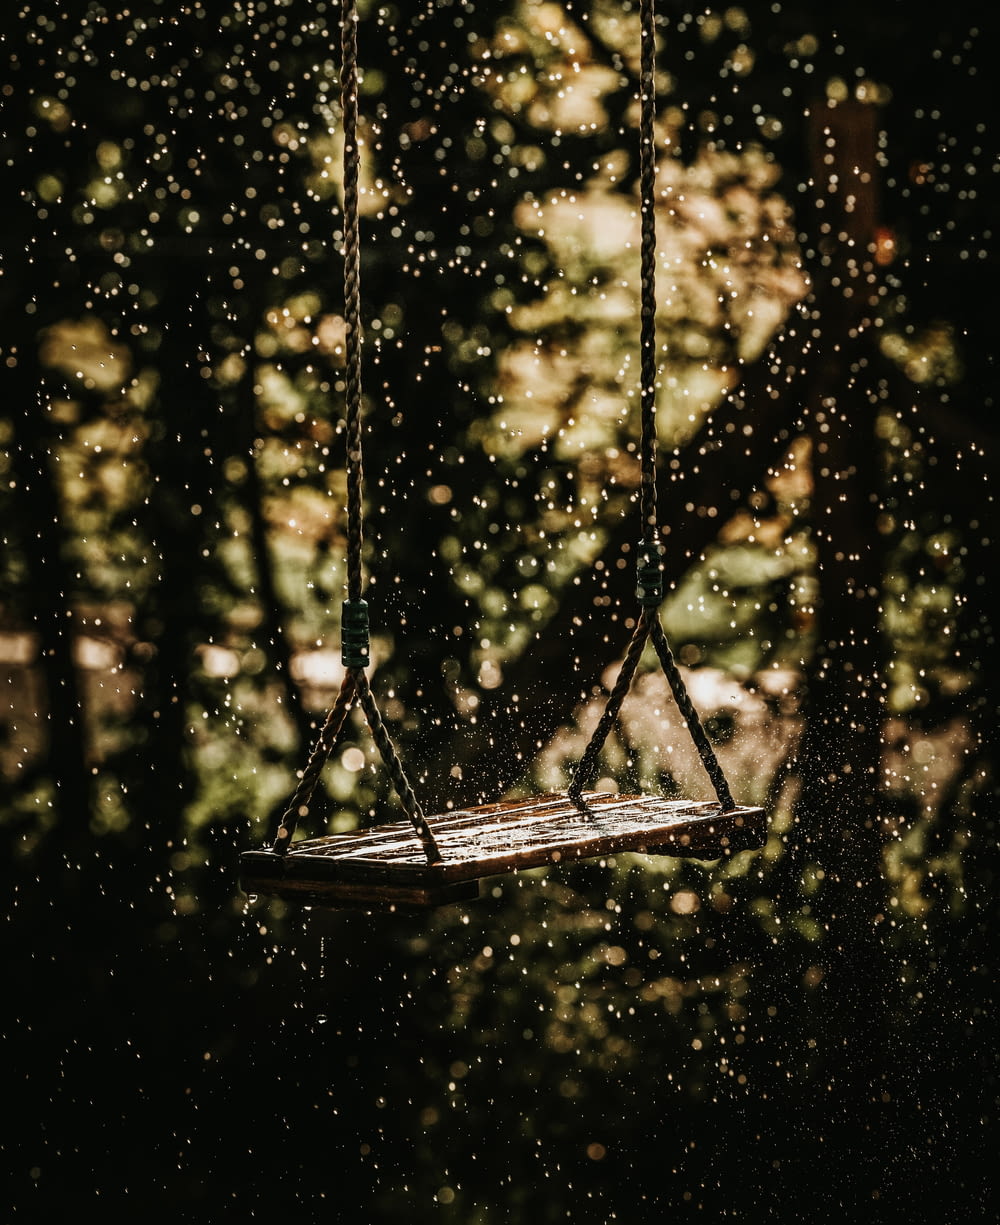 a swing hanging from a tree in the rain